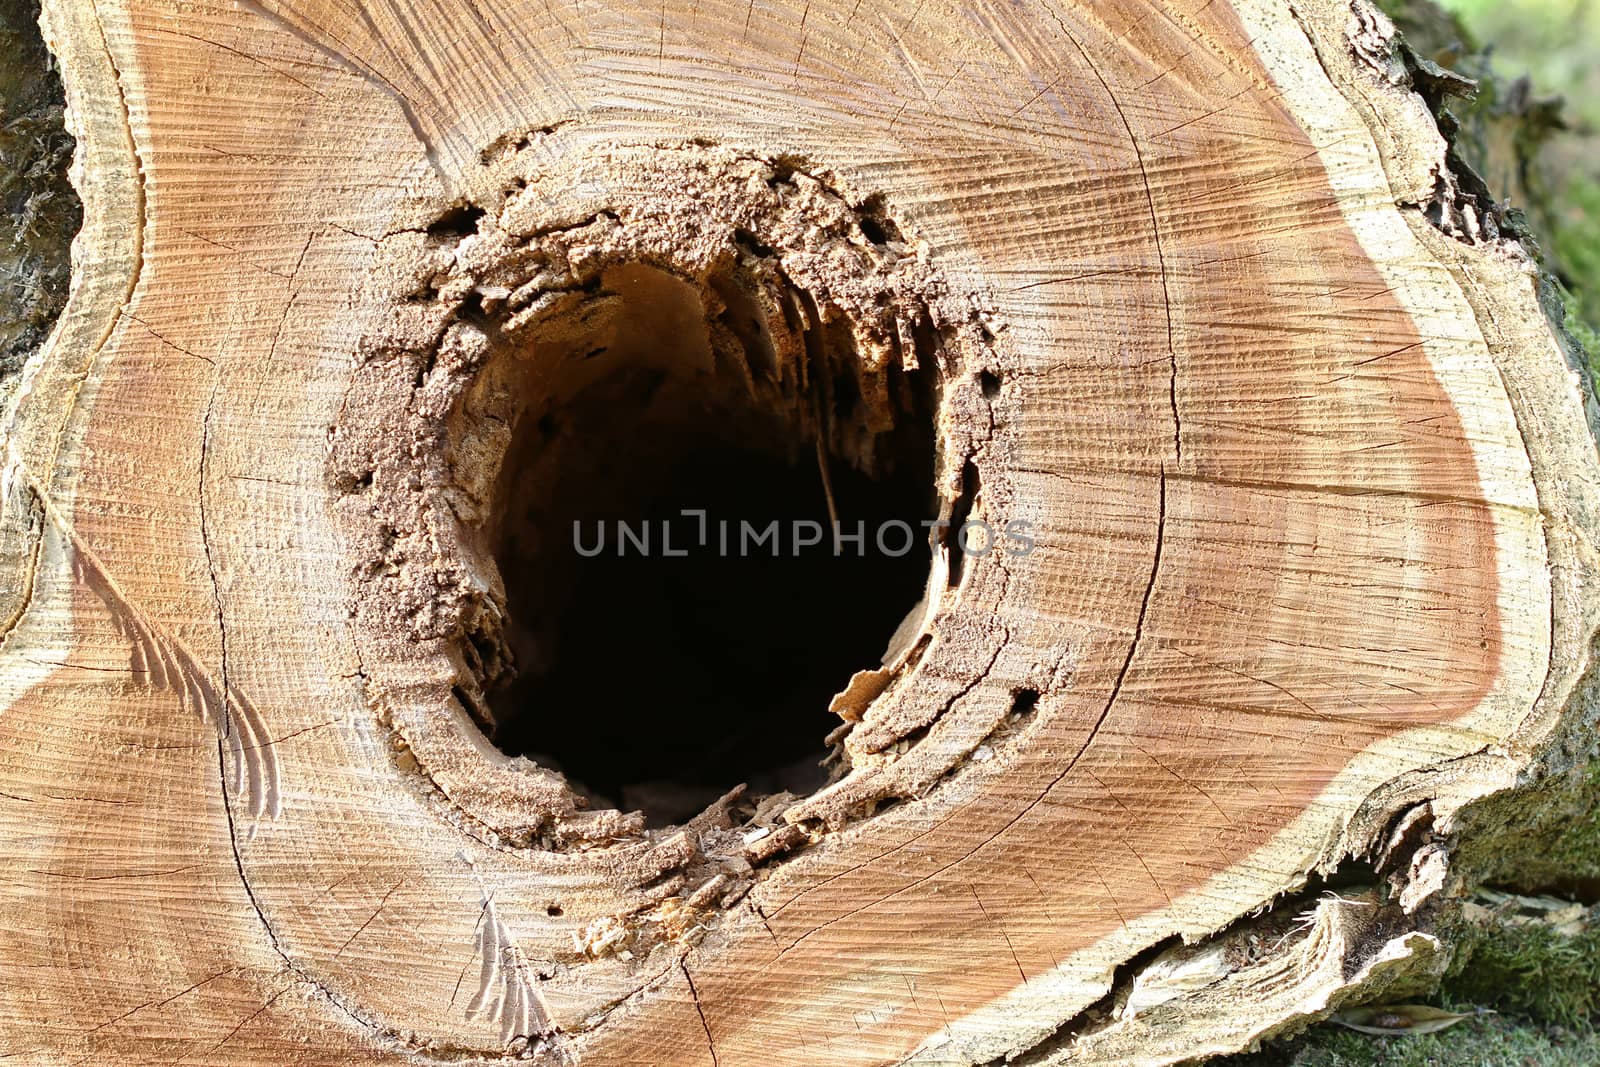 Cut tree trunk - a hole in wood by Mibuch